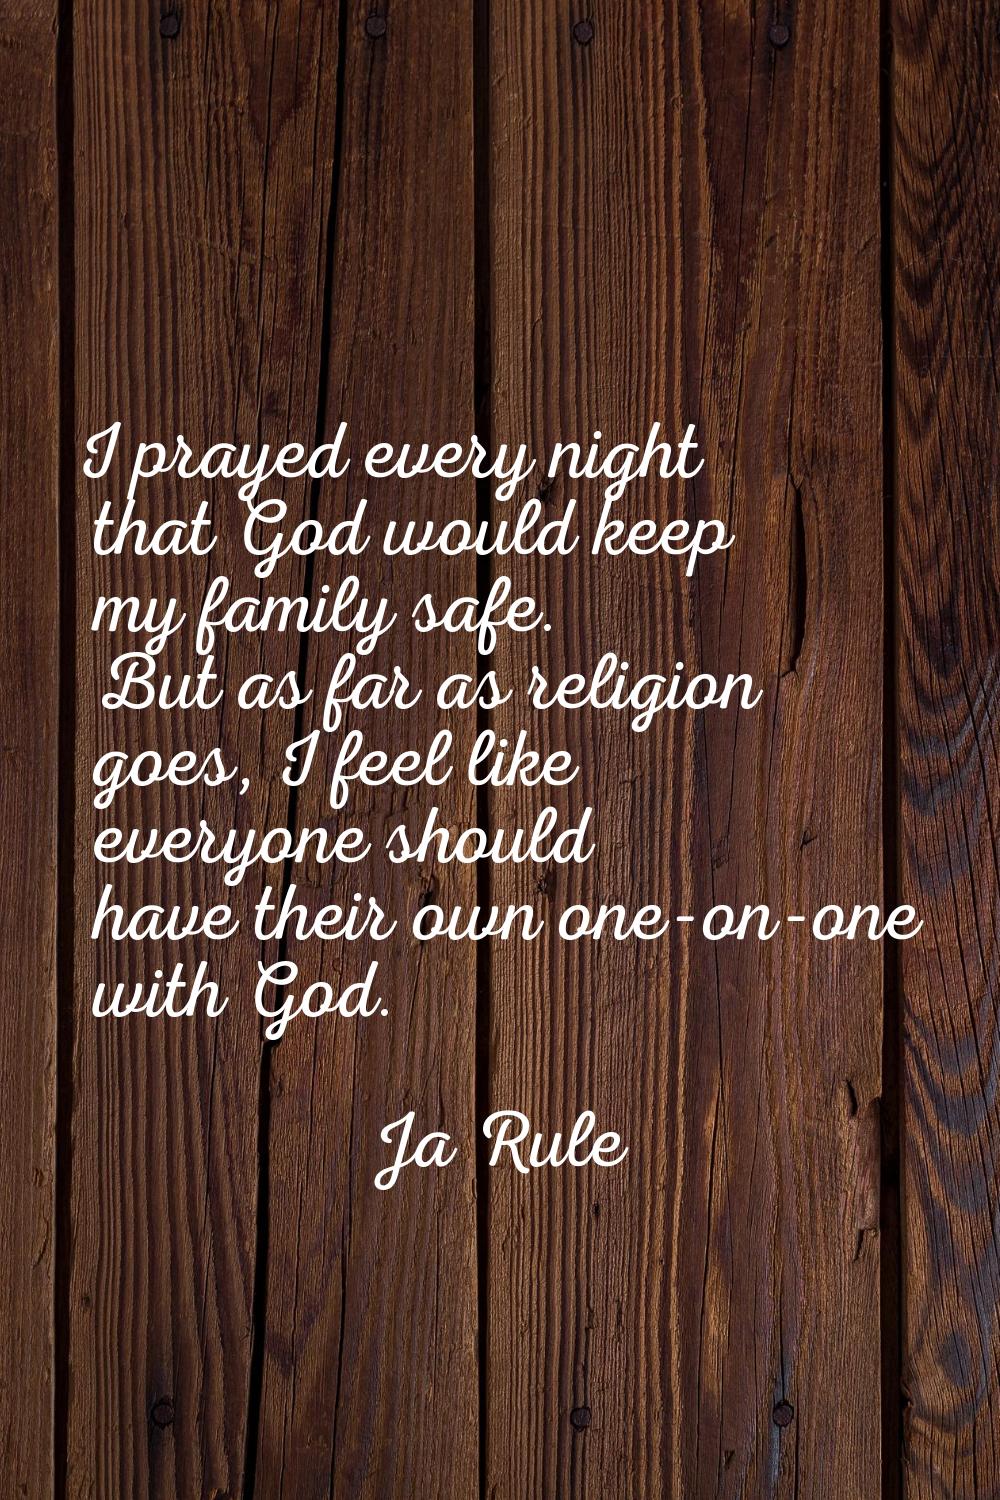 I prayed every night that God would keep my family safe. But as far as religion goes, I feel like e